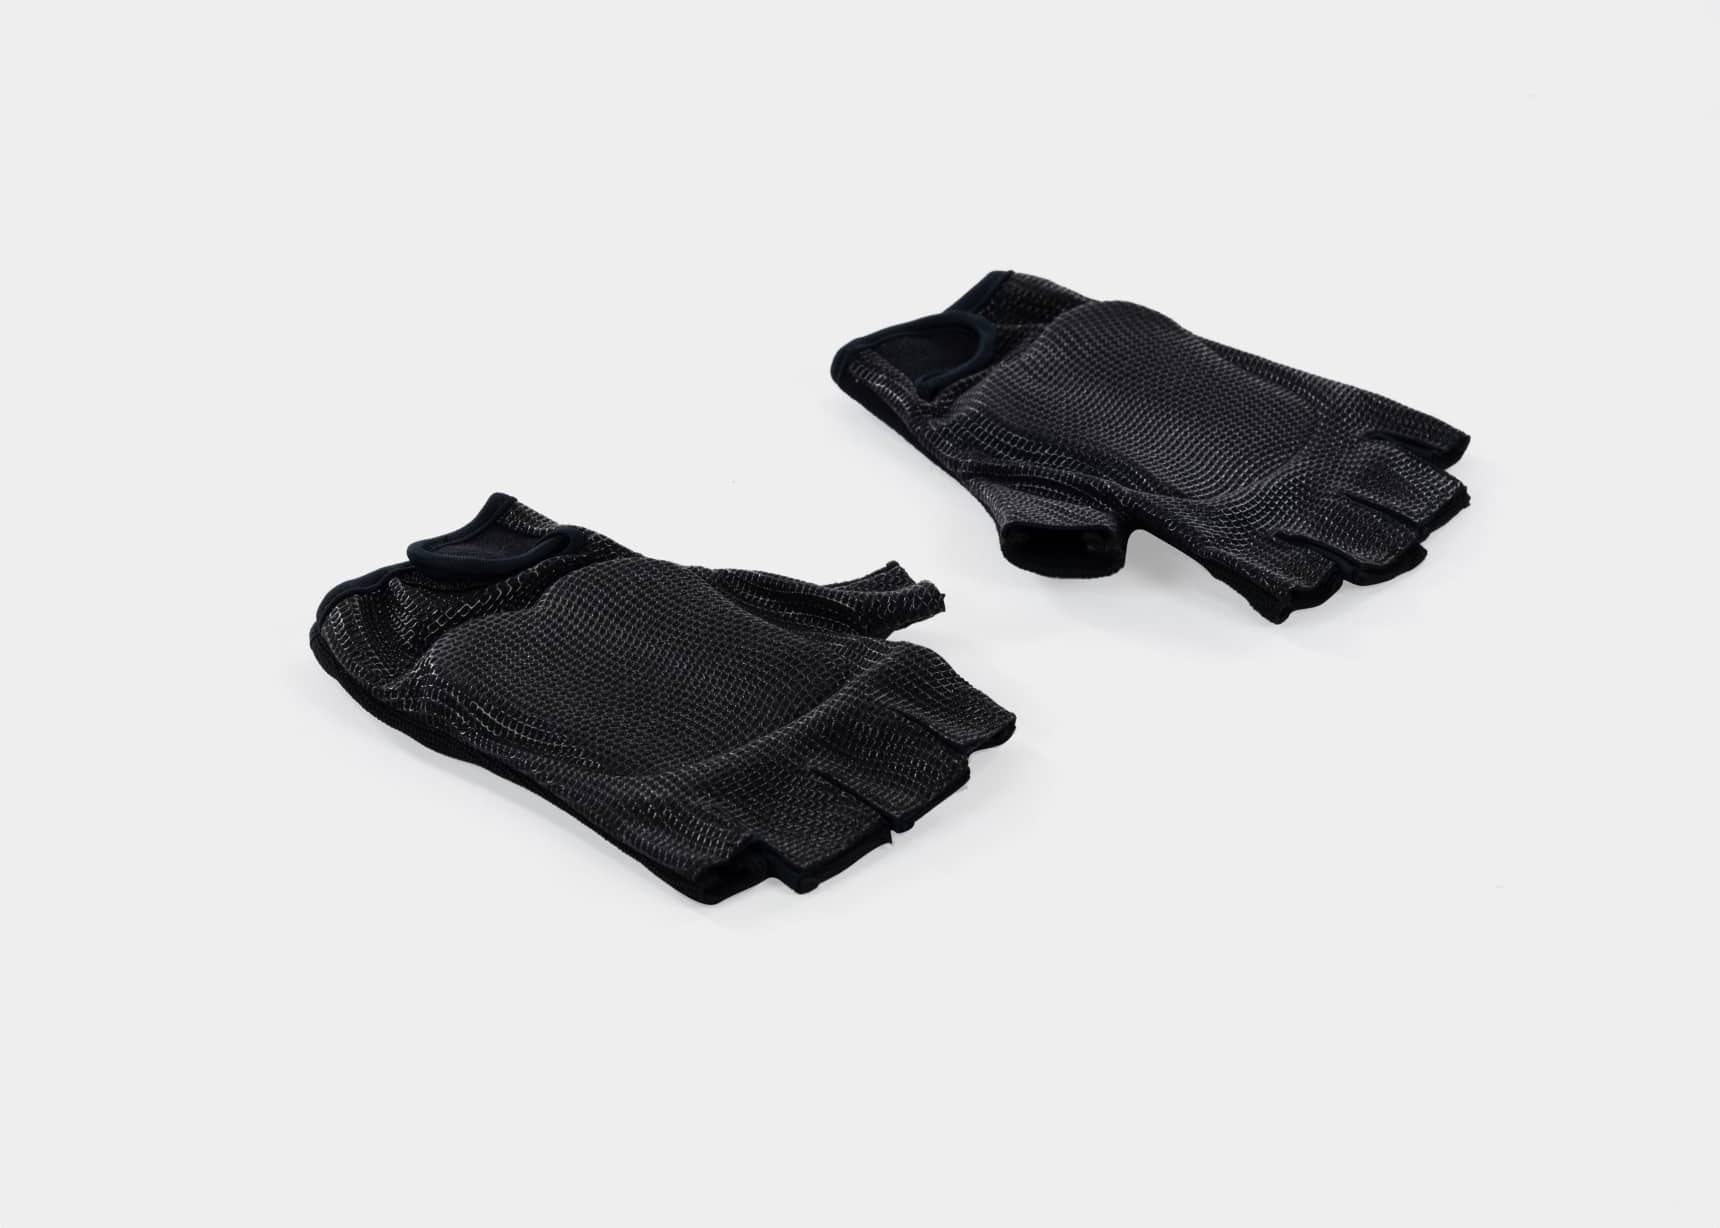 Black Wrist Assured Gloves for joint protection.